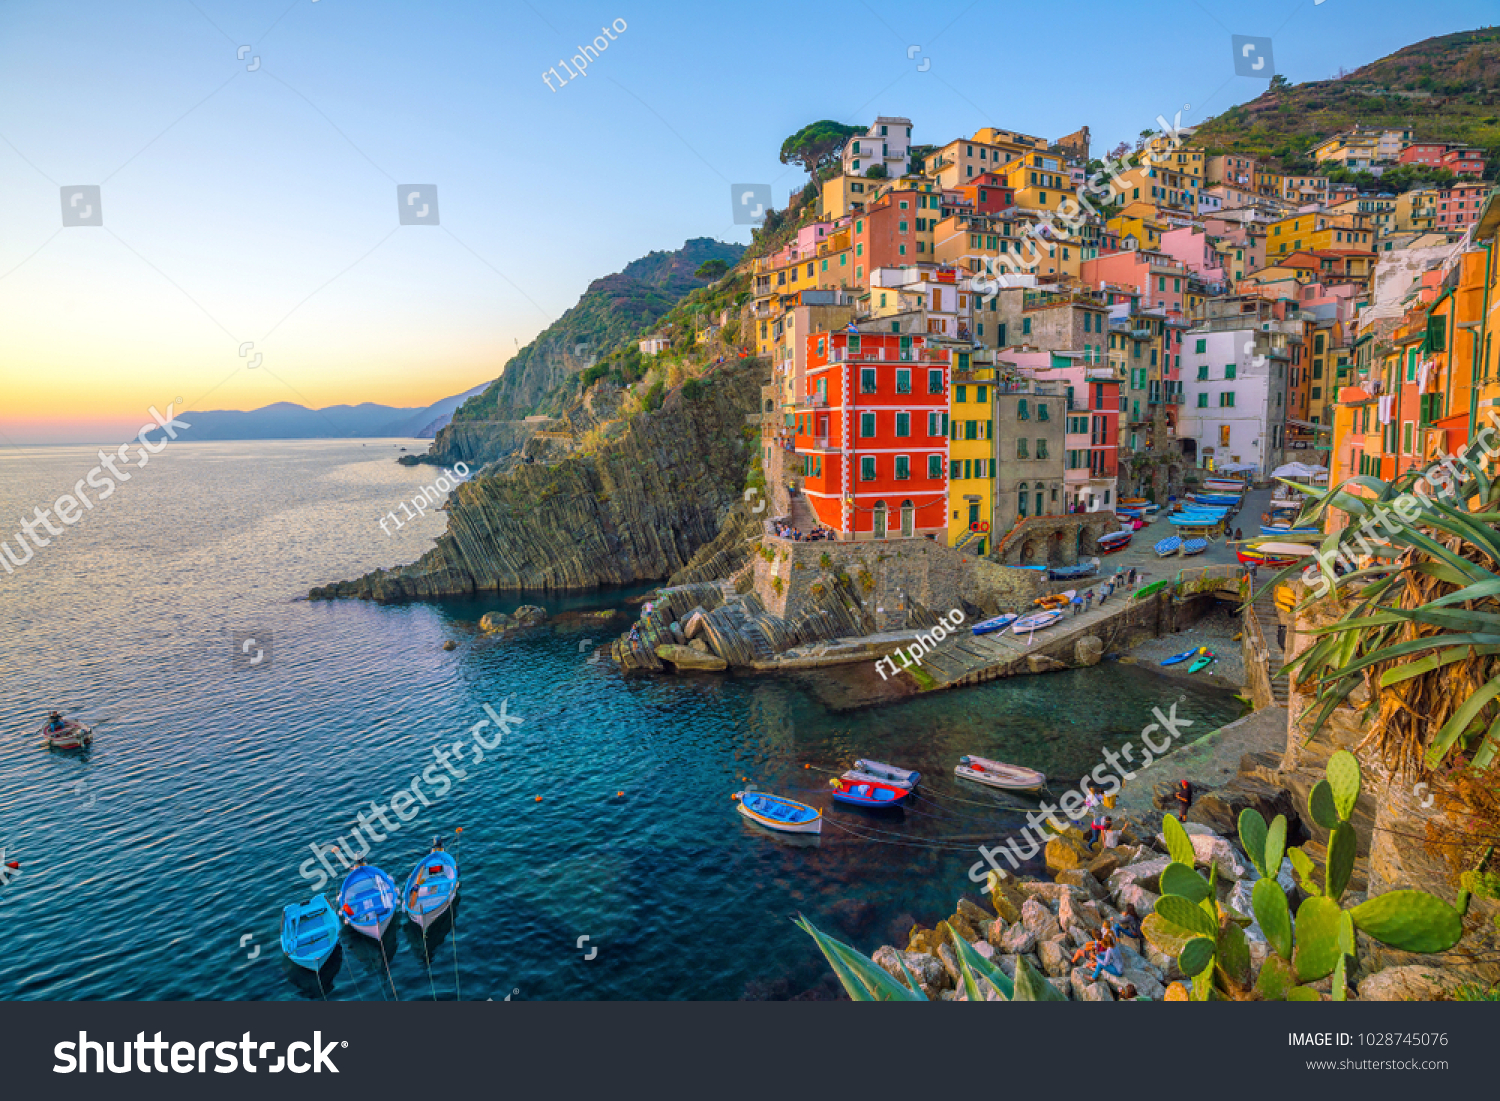 Riomaggiore, the first city of the Cique Terre sequence of hill cities in Liguria, Italy #1028745076